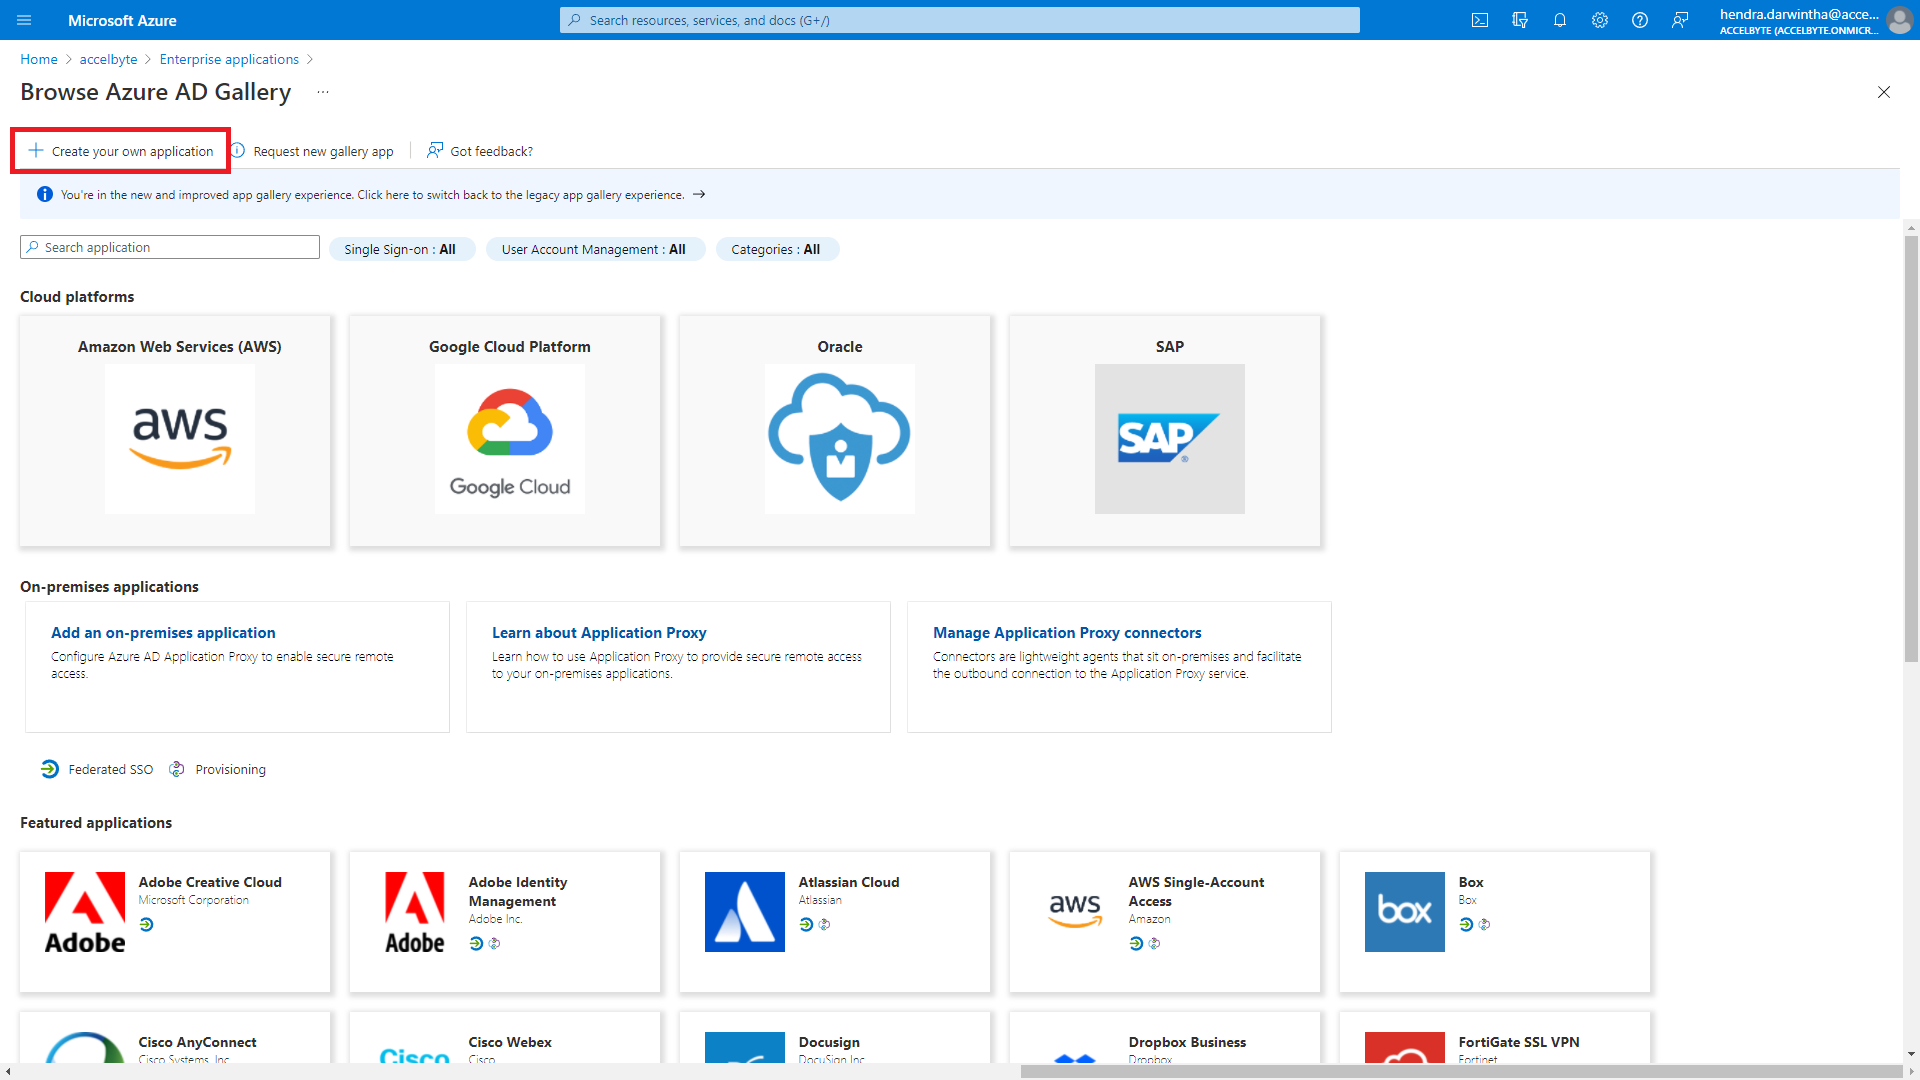 Browse Azure AD Gallery